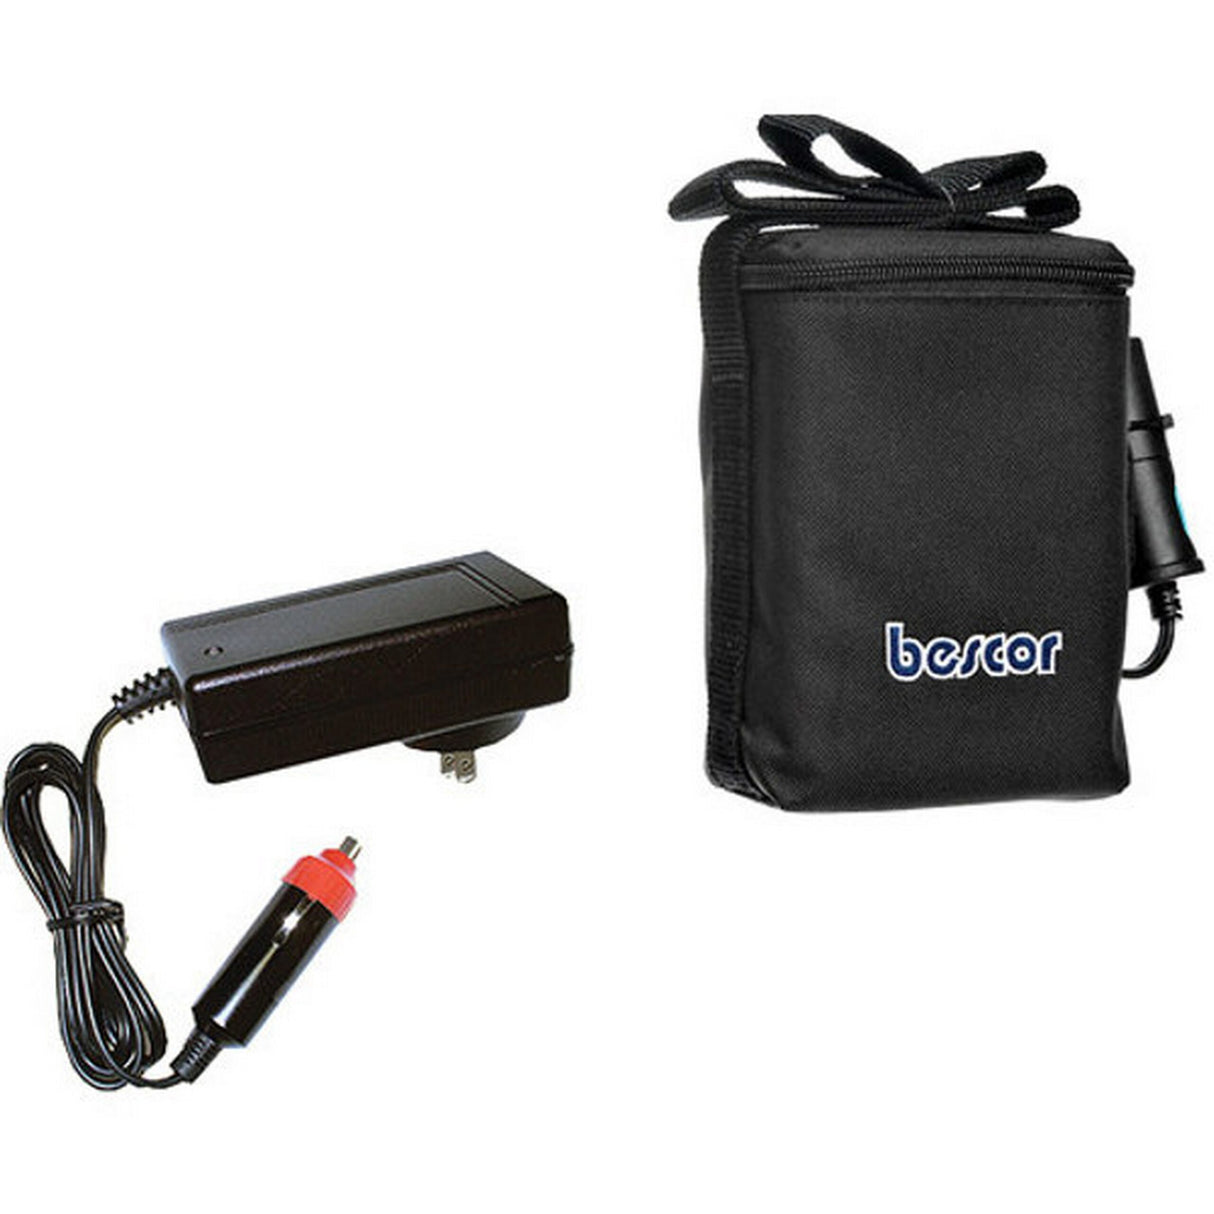 Bescor MM-9ATM 12V/9A SLA Battery Pack and Auto Charger